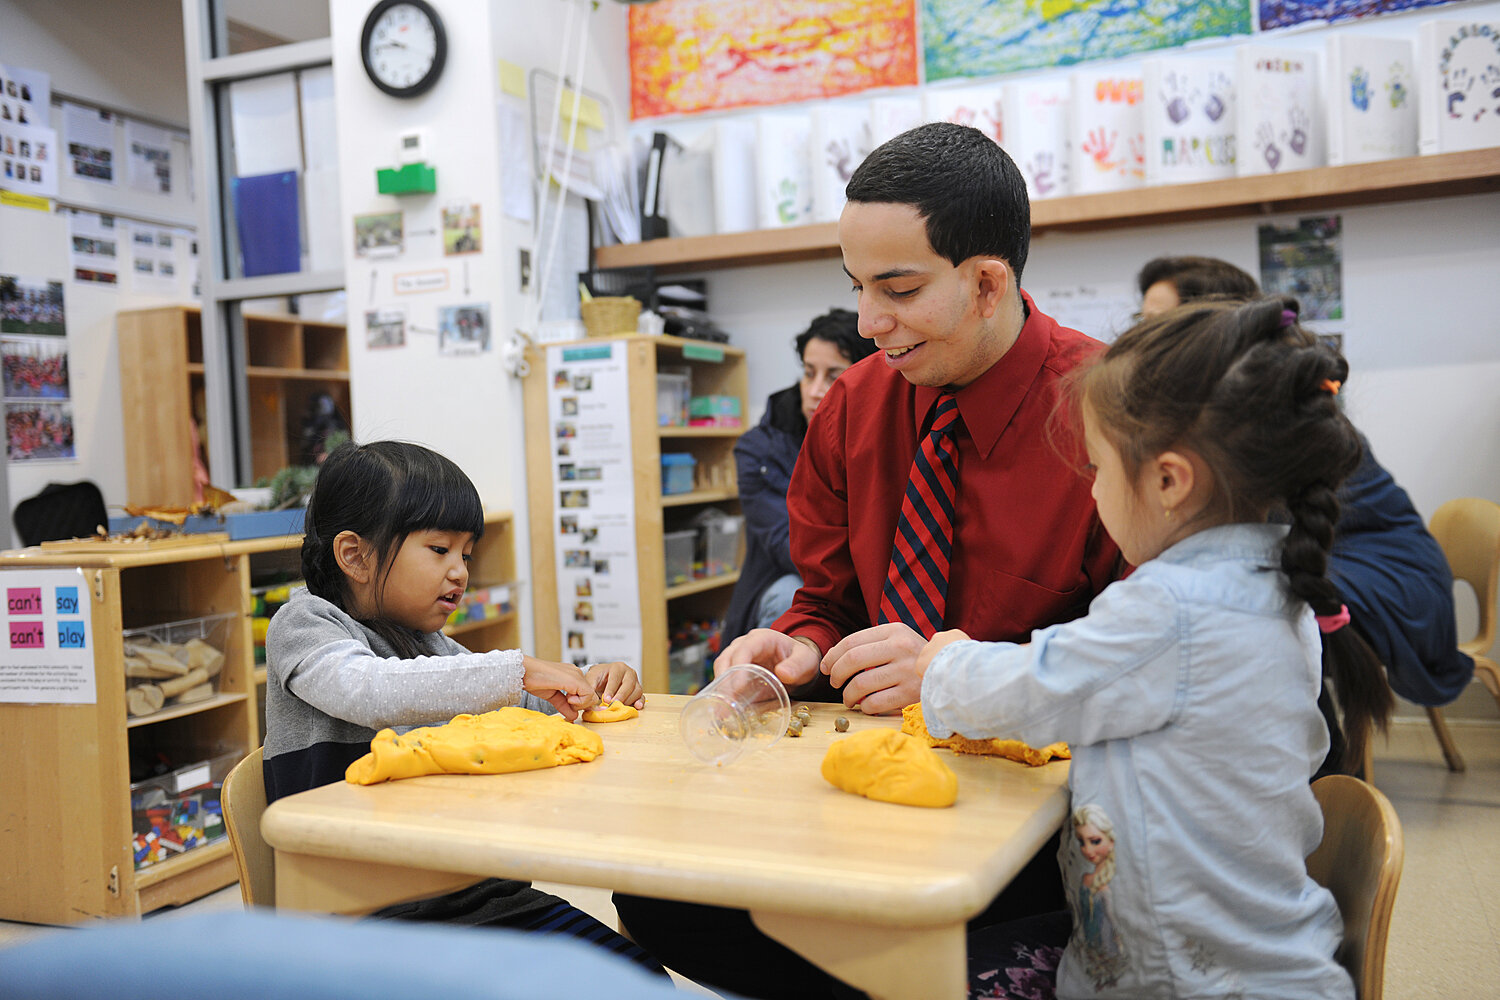 Student teacher with two yound children in the early learning center